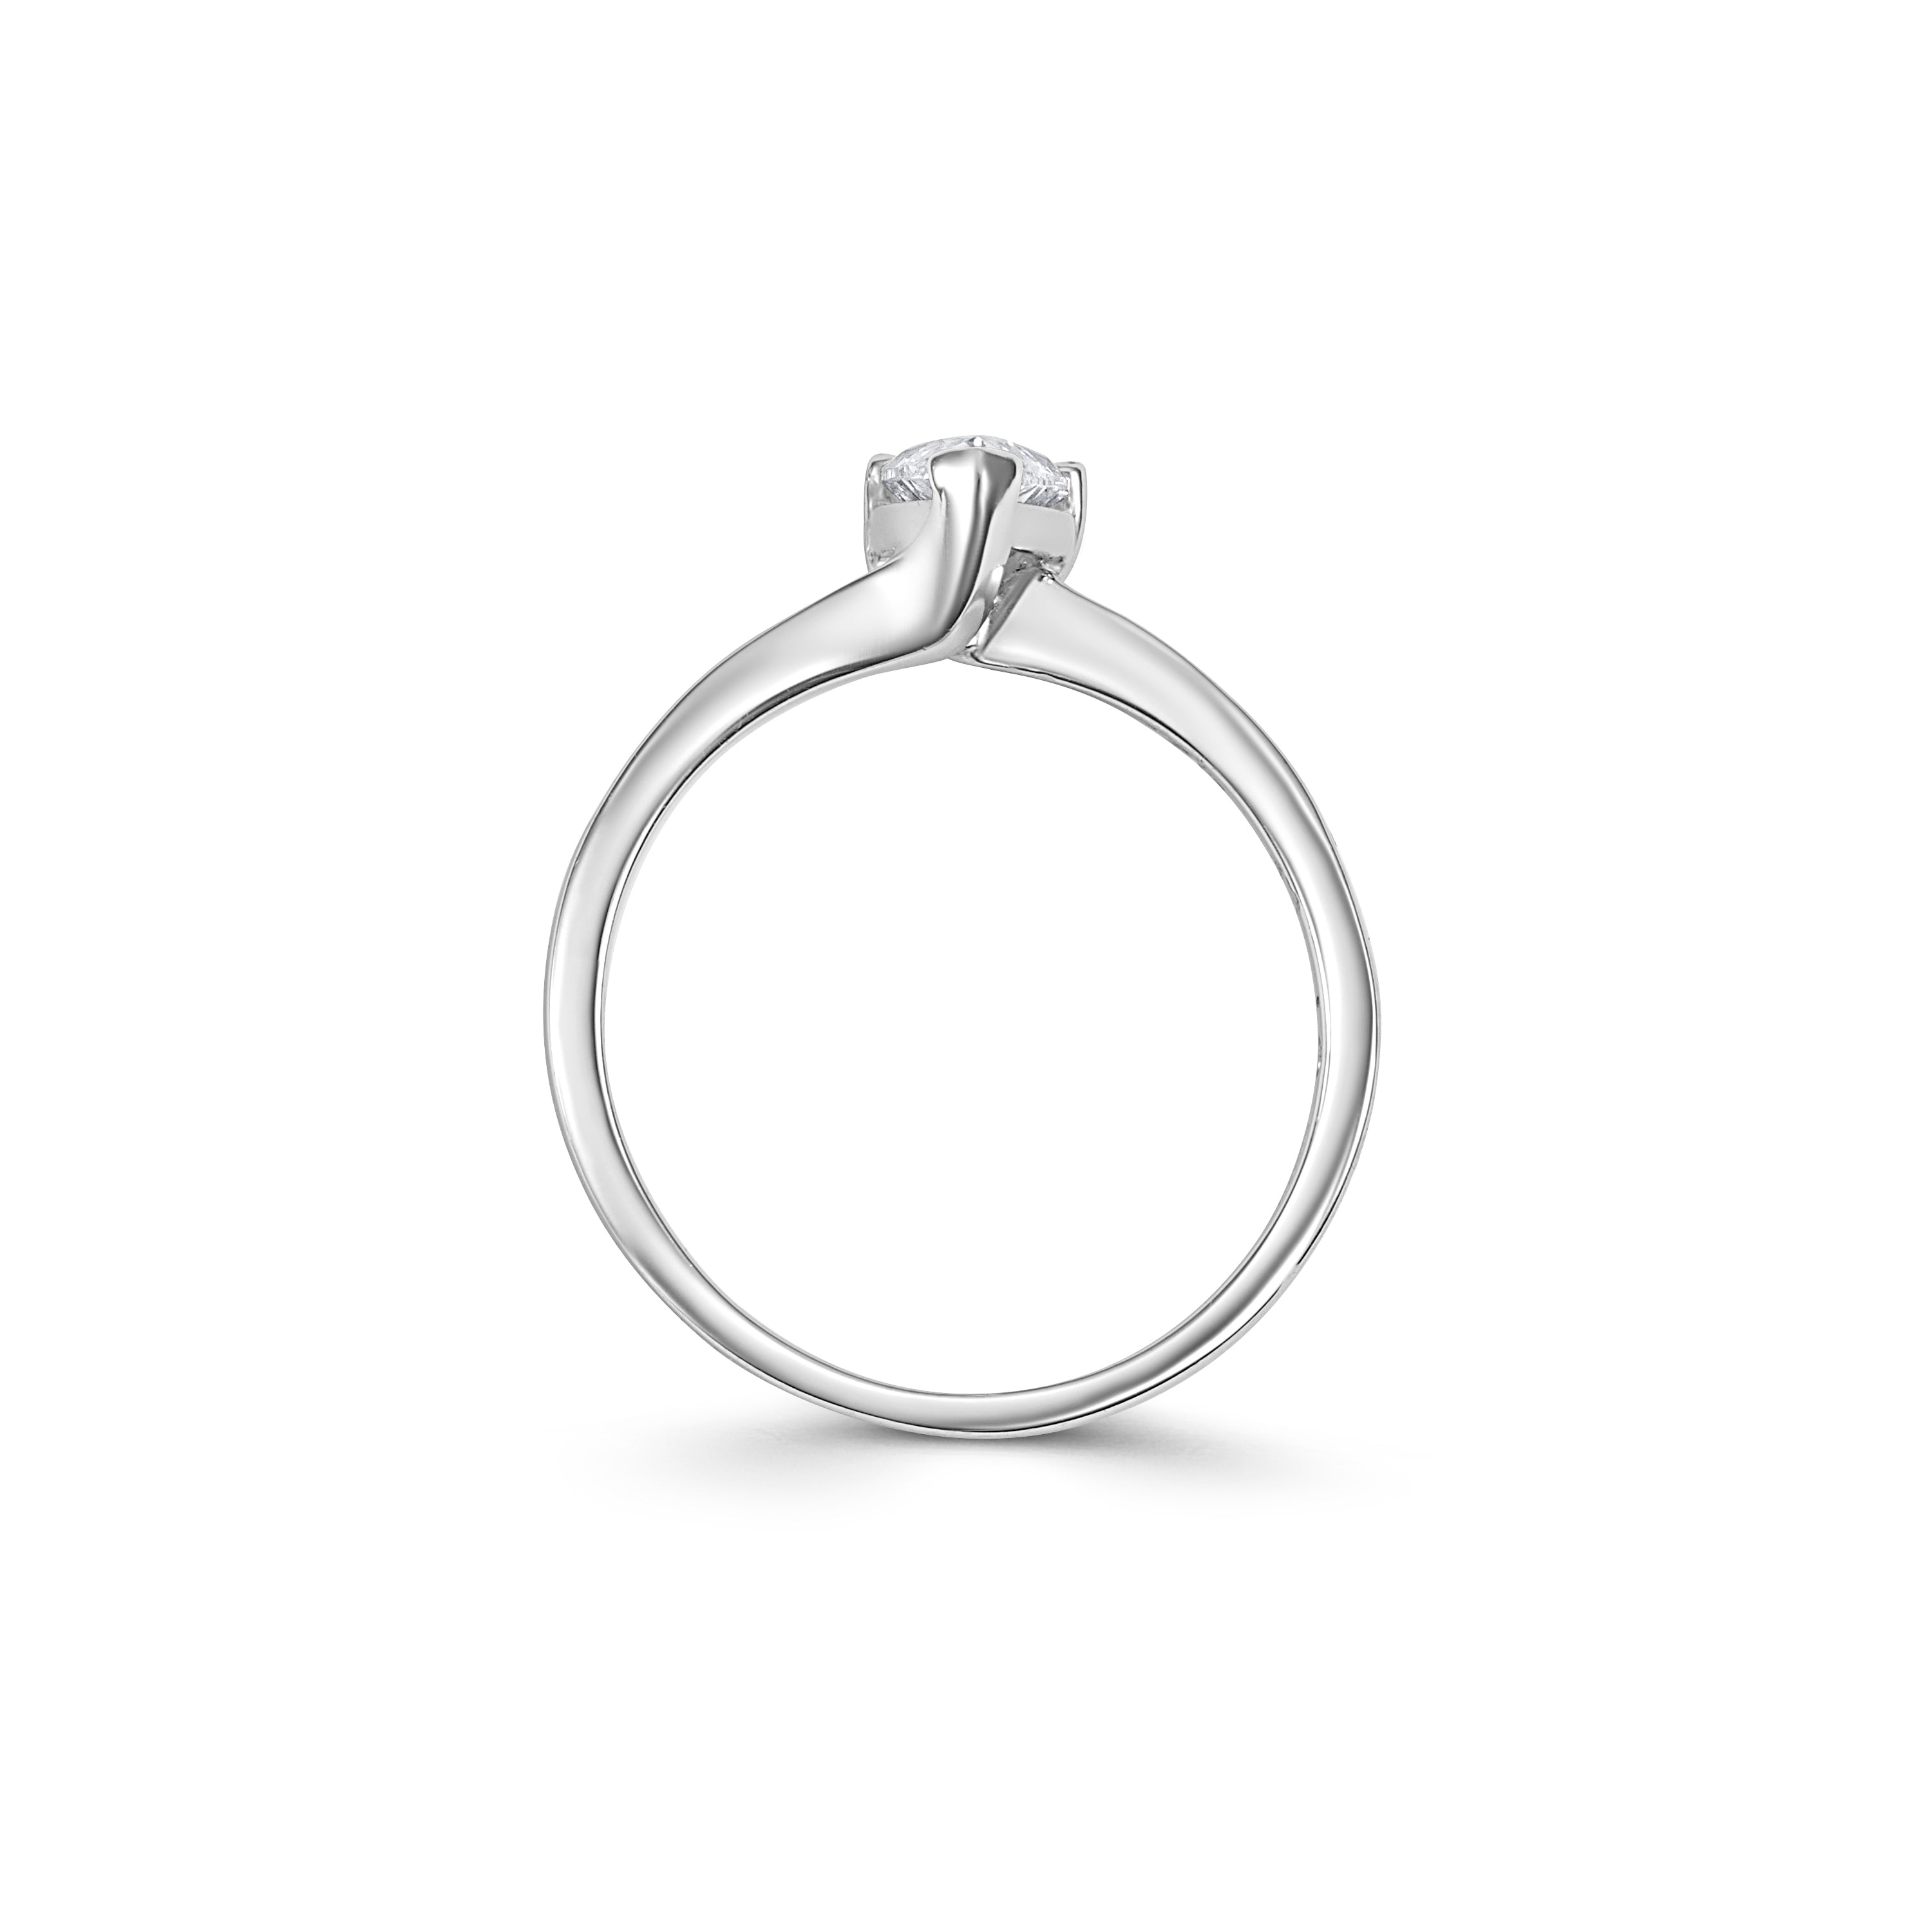 Platinum Pear Shaped Diamond Solitaire Ring